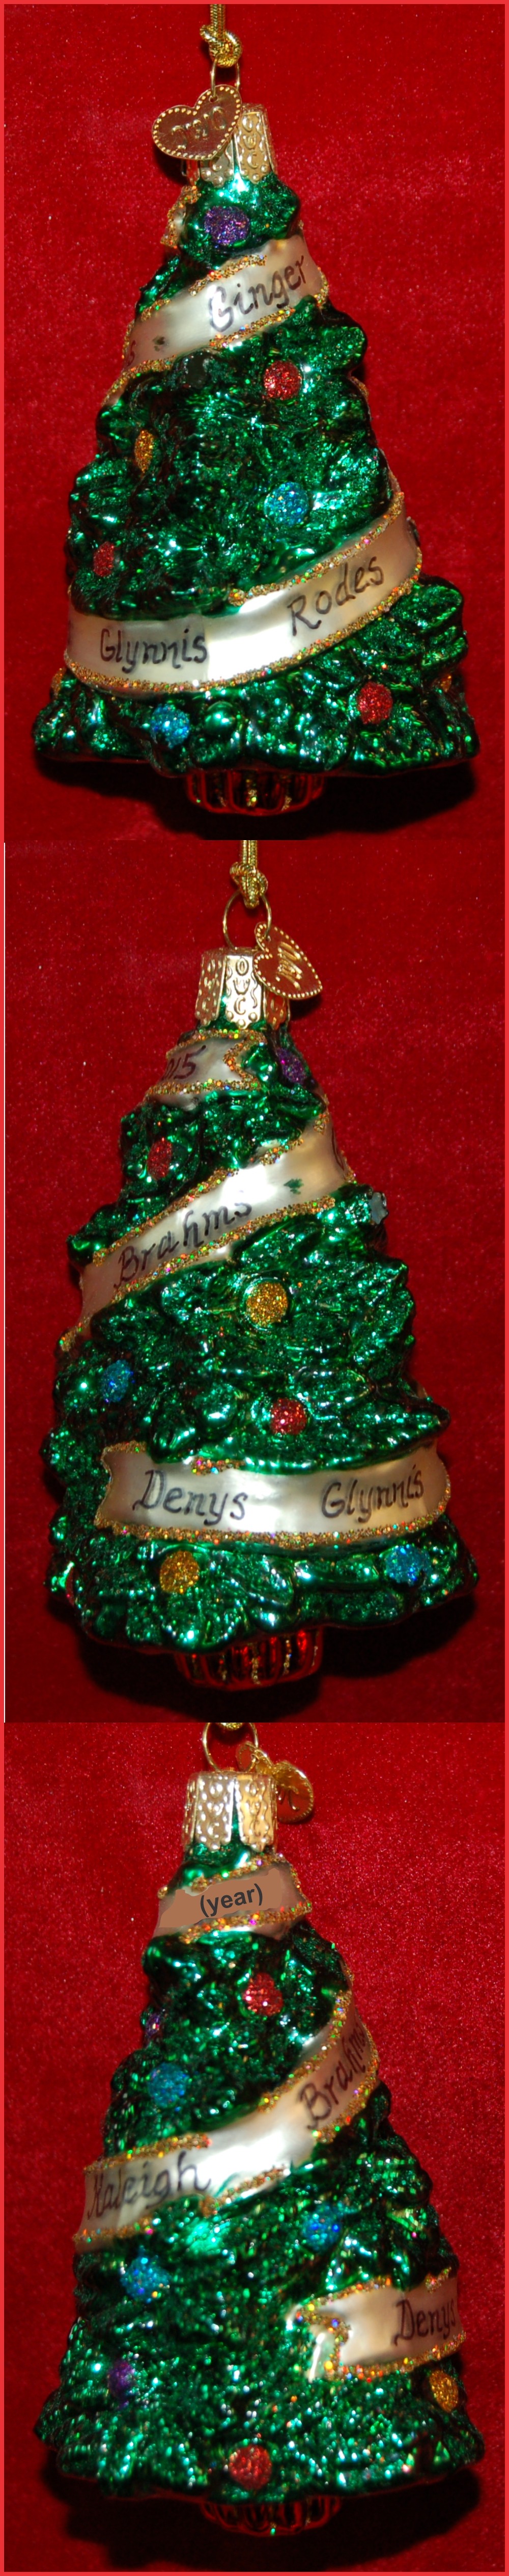 Sentimental Christmas Tree Glass Christmas Ornament Personalized by RussellRhodes.com